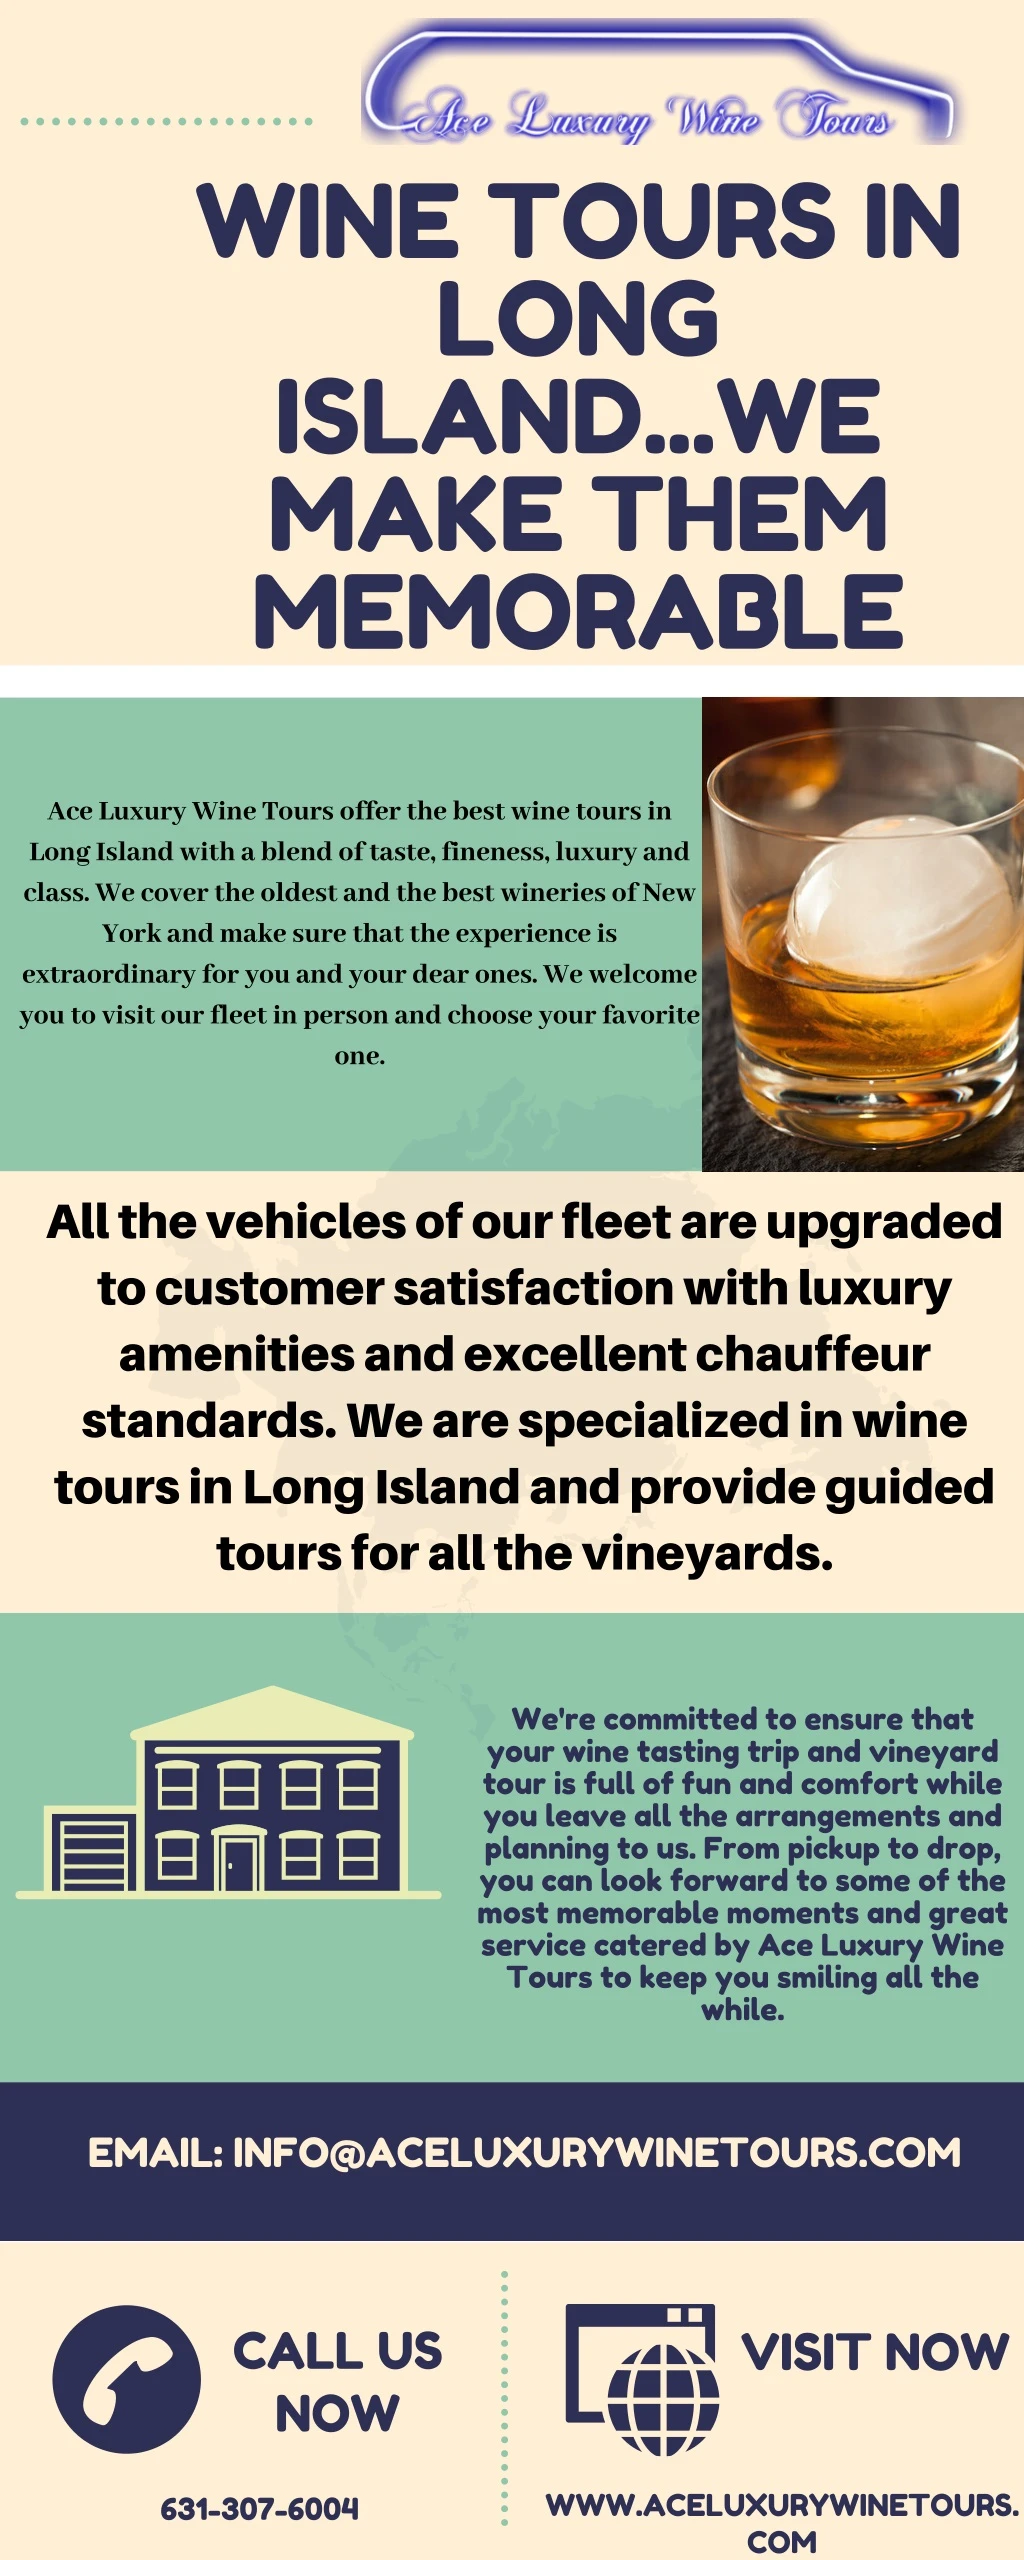 wine tours in long island we make them memorable